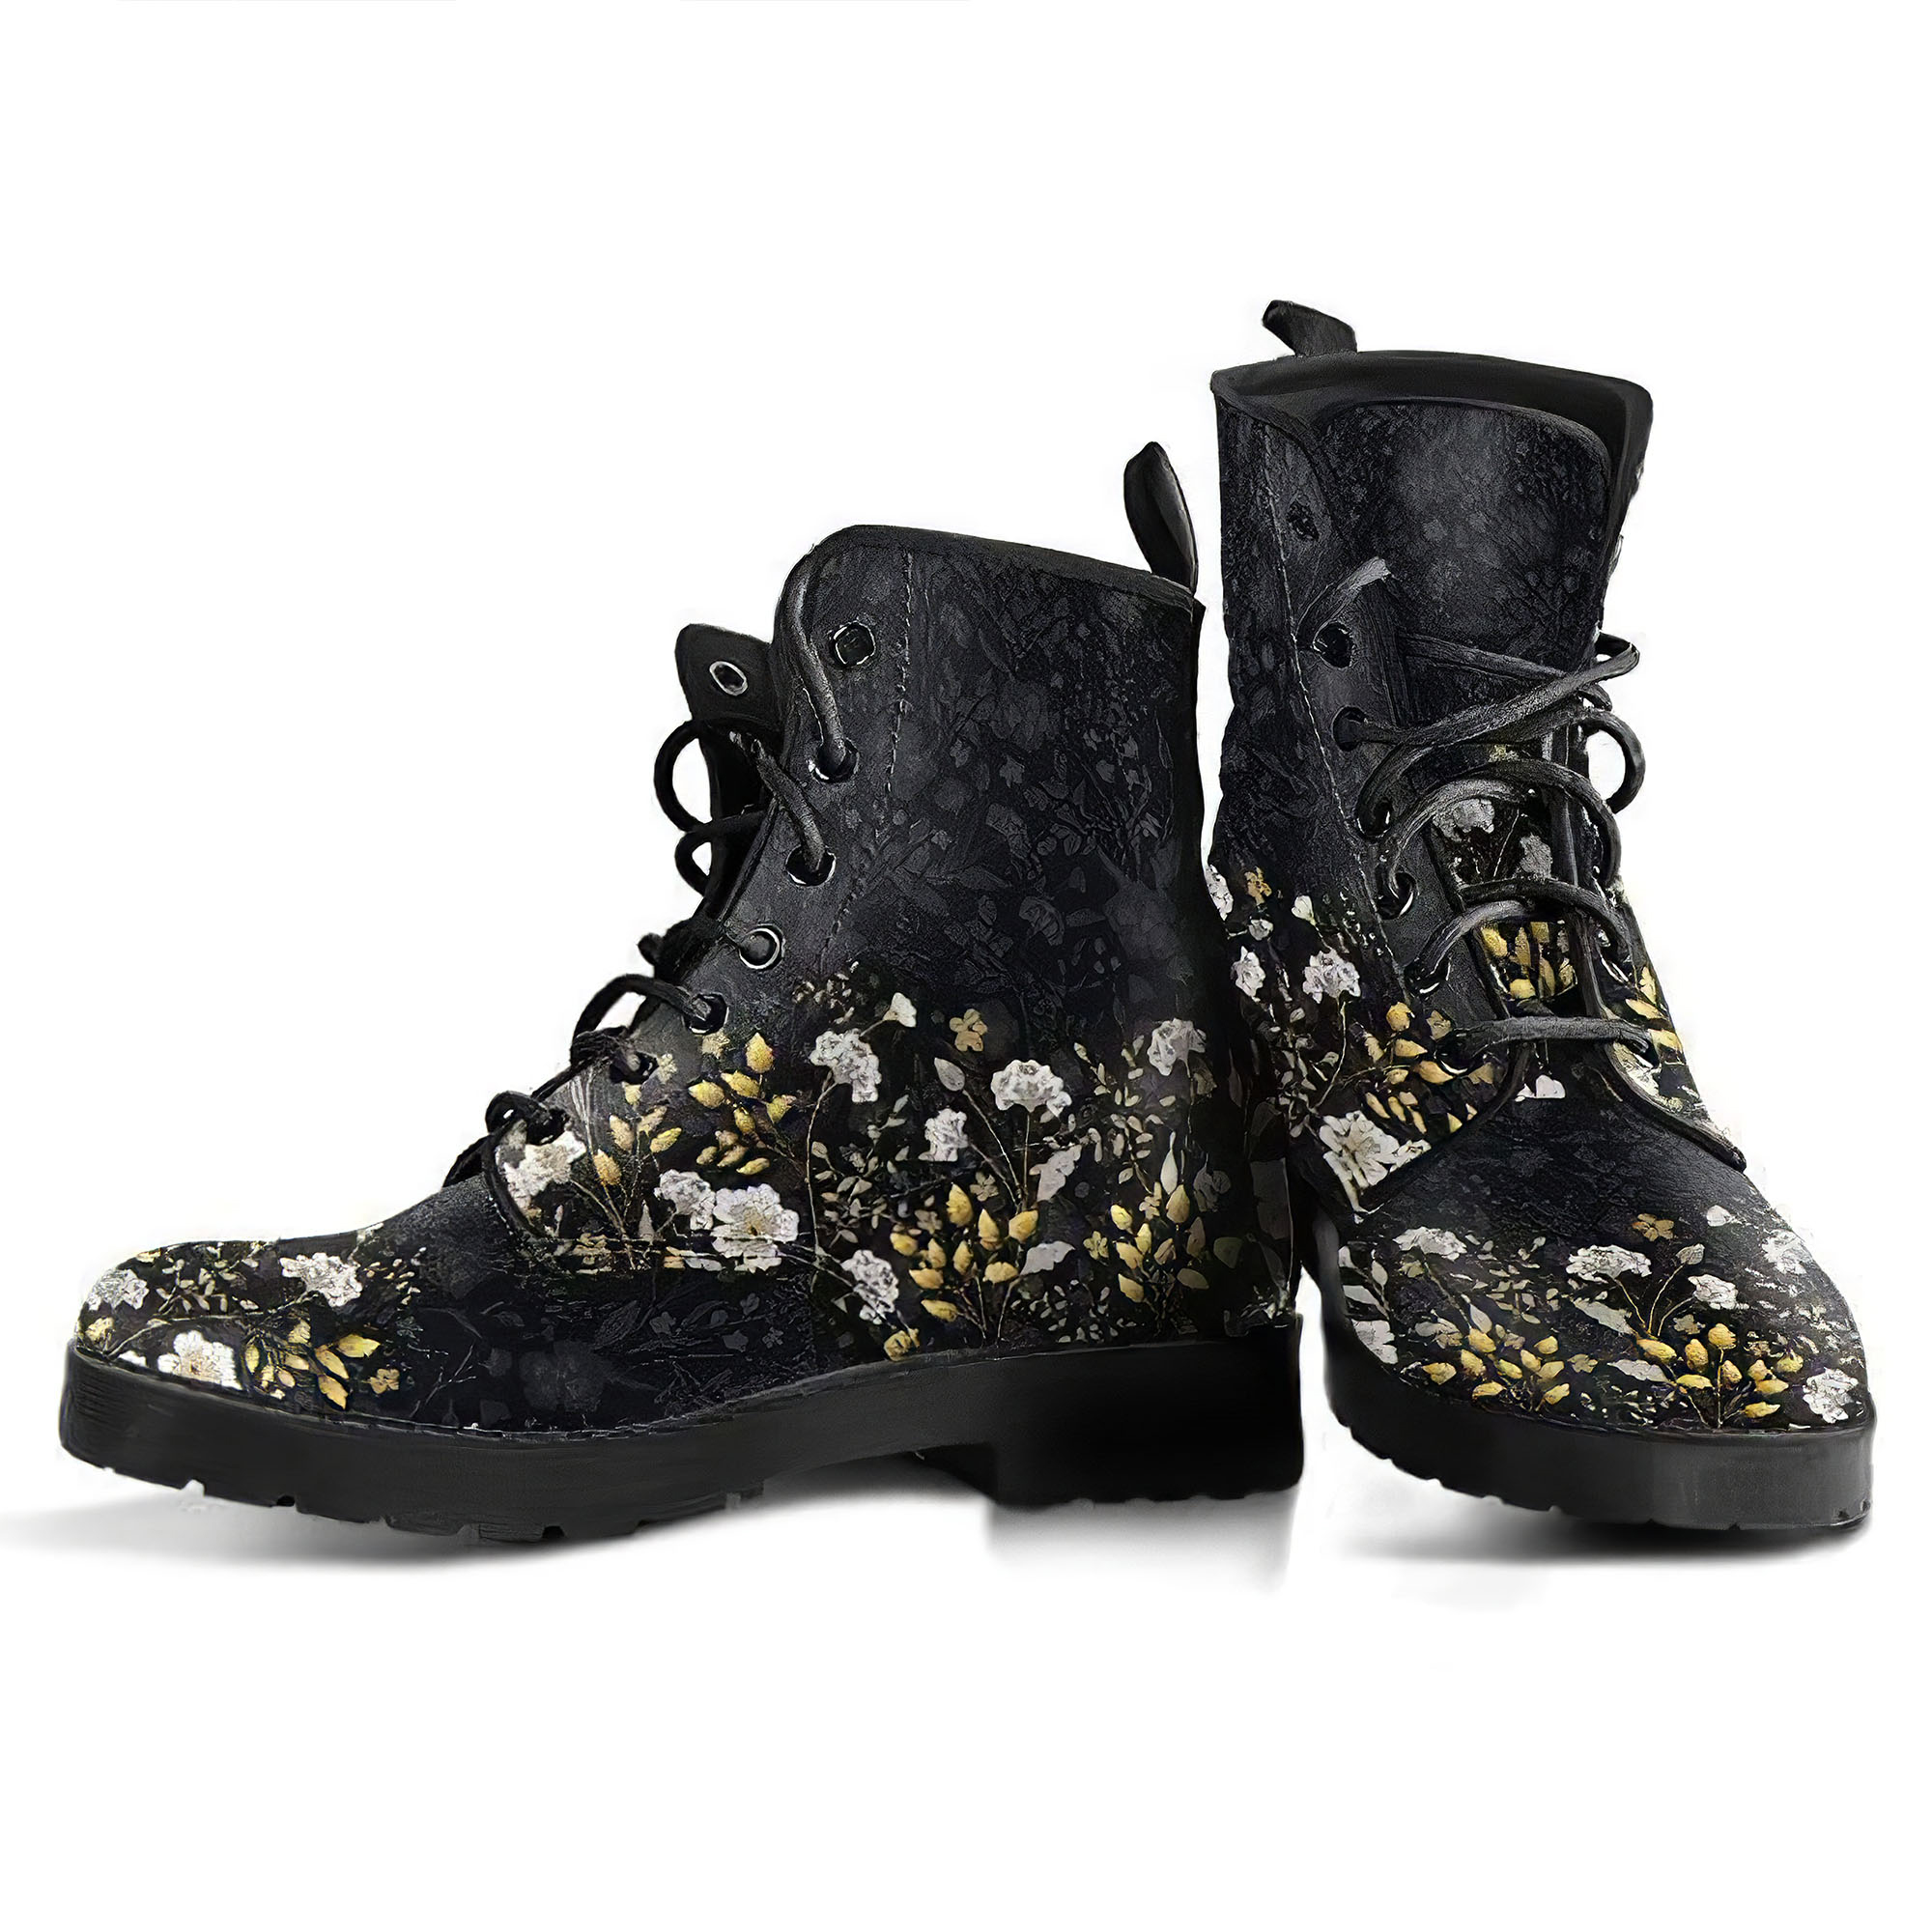 floral-pattern-2-handcrafted-boots-gp-main.jpg